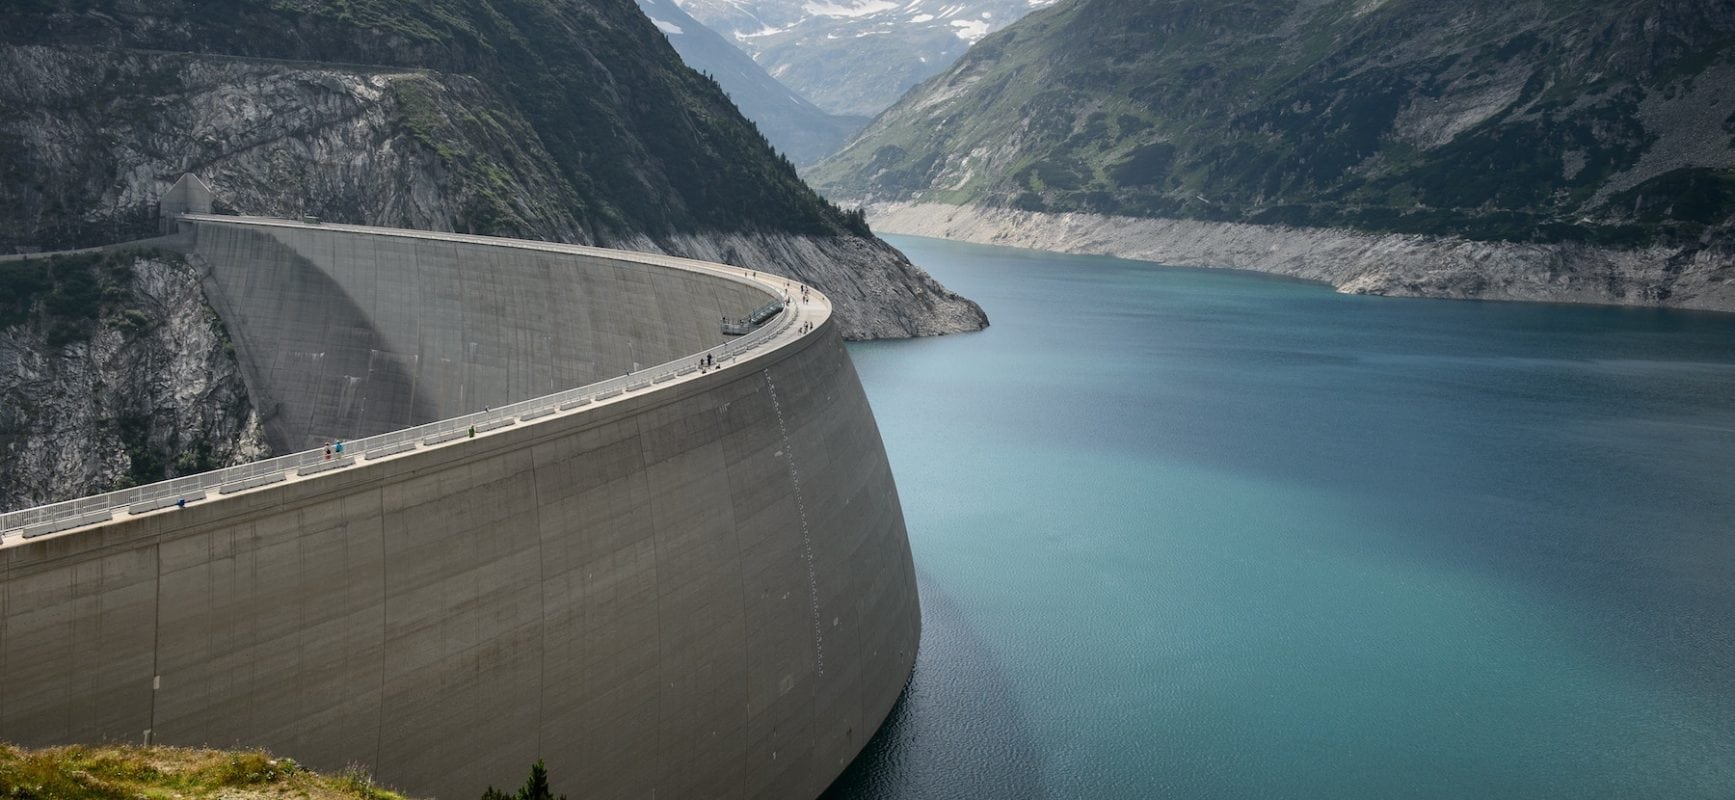 Reservior Dam Water Energy Gravity Impact Projects